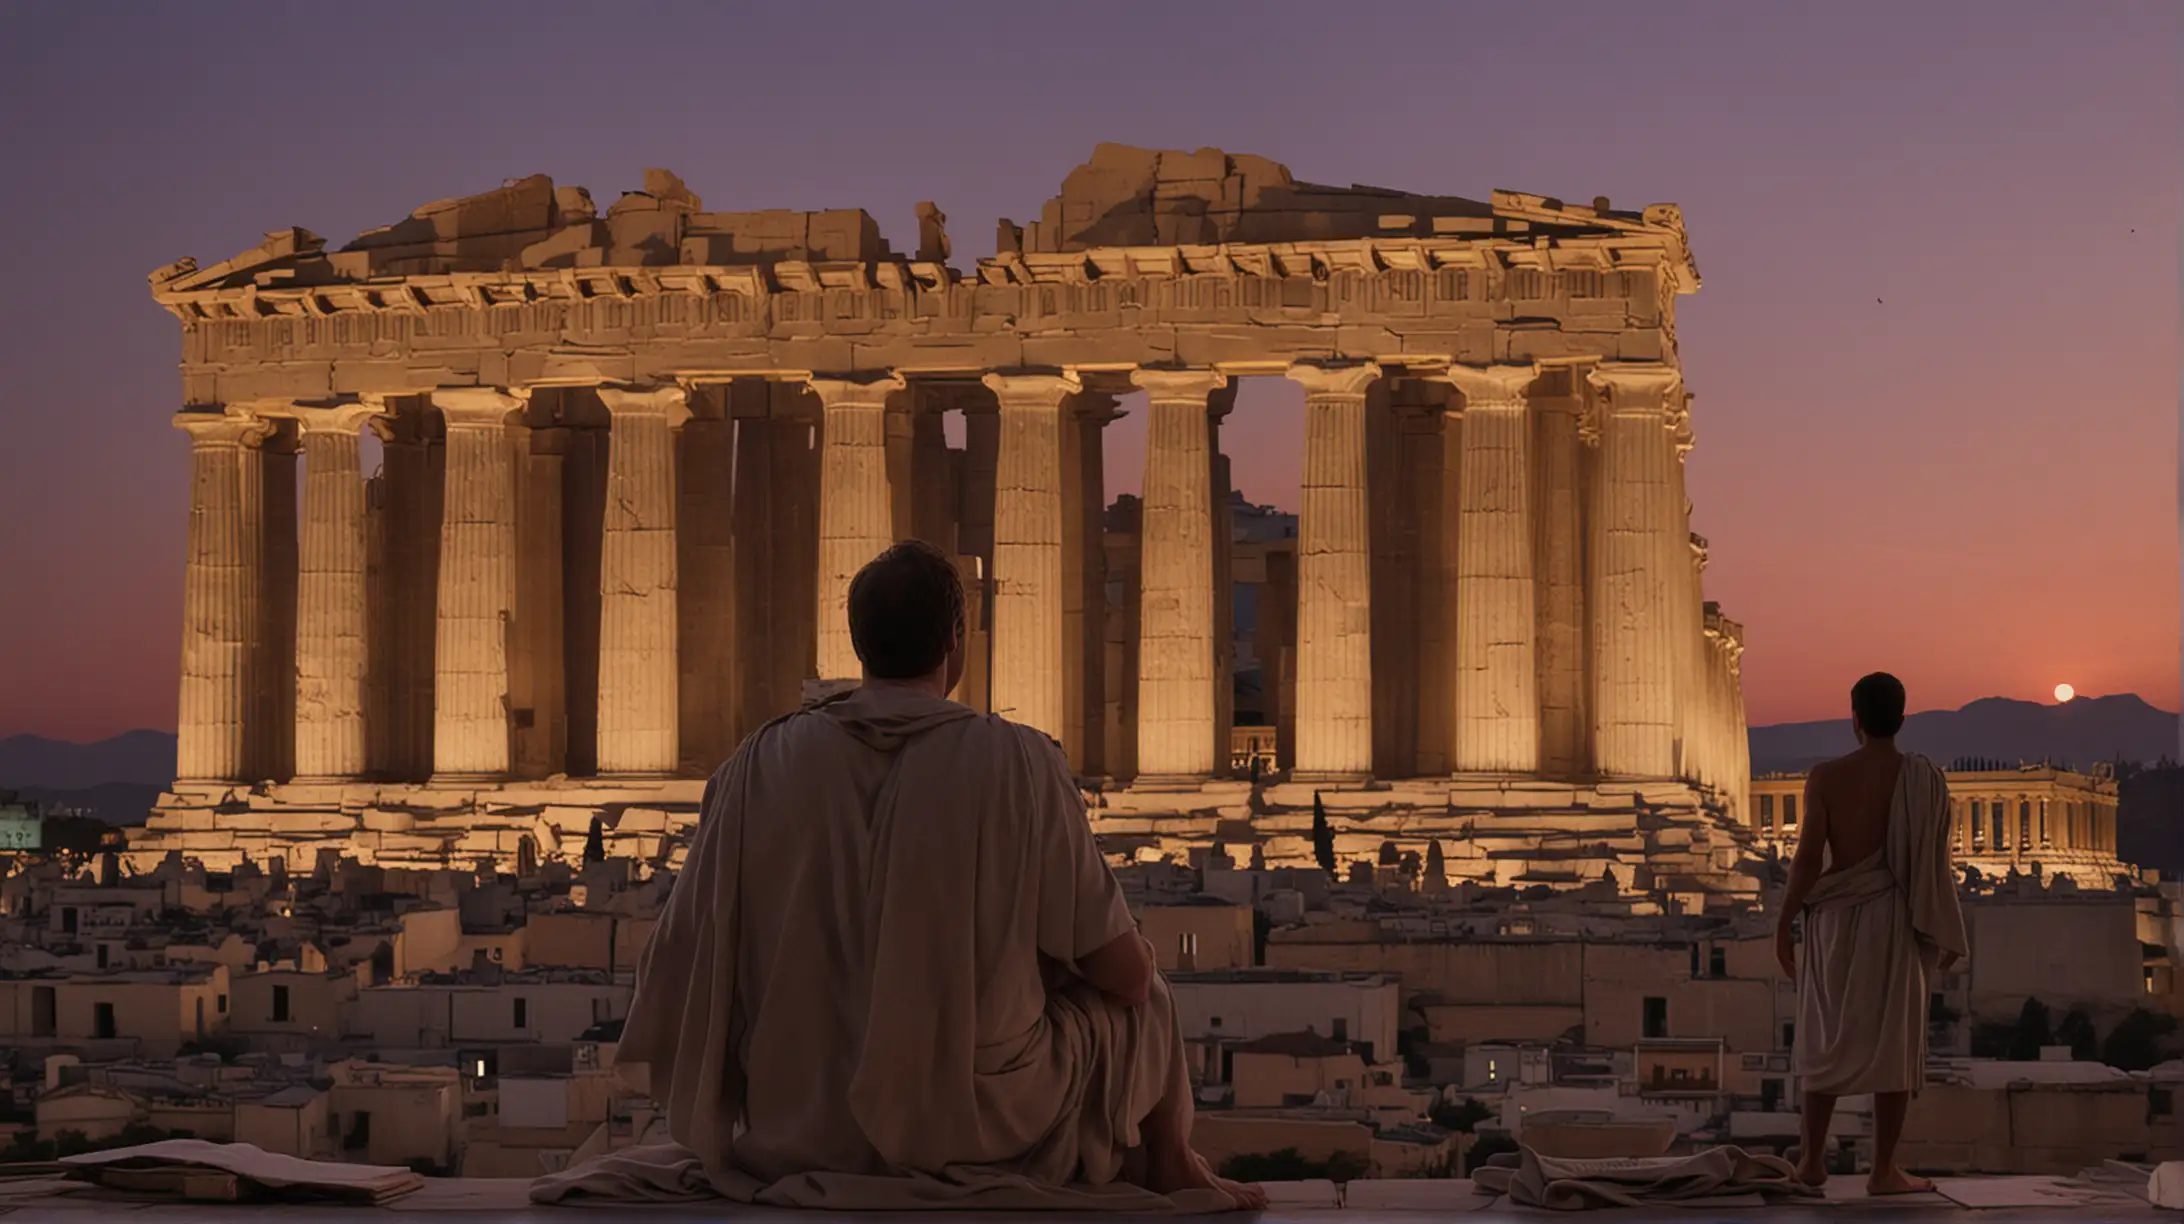 Visualization Prompt: Visualize a philosopher reflecting by a temple at dusk with the Parthenon in the background.
Image Description: At dusk, a philosopher with a lean, muscular build stands pensively by an ancient temple, with the Parthenon visible in the background. The sky is painted with hues of orange and purple as the sun sets. The philosopher's face is illuminated by the soft glow of the fading light, his expression thoughtful as he reflects on the day's teachings. The majestic temple and Parthenon in the background emphasize the grandeur and enduring legacy of Greek philosophy.